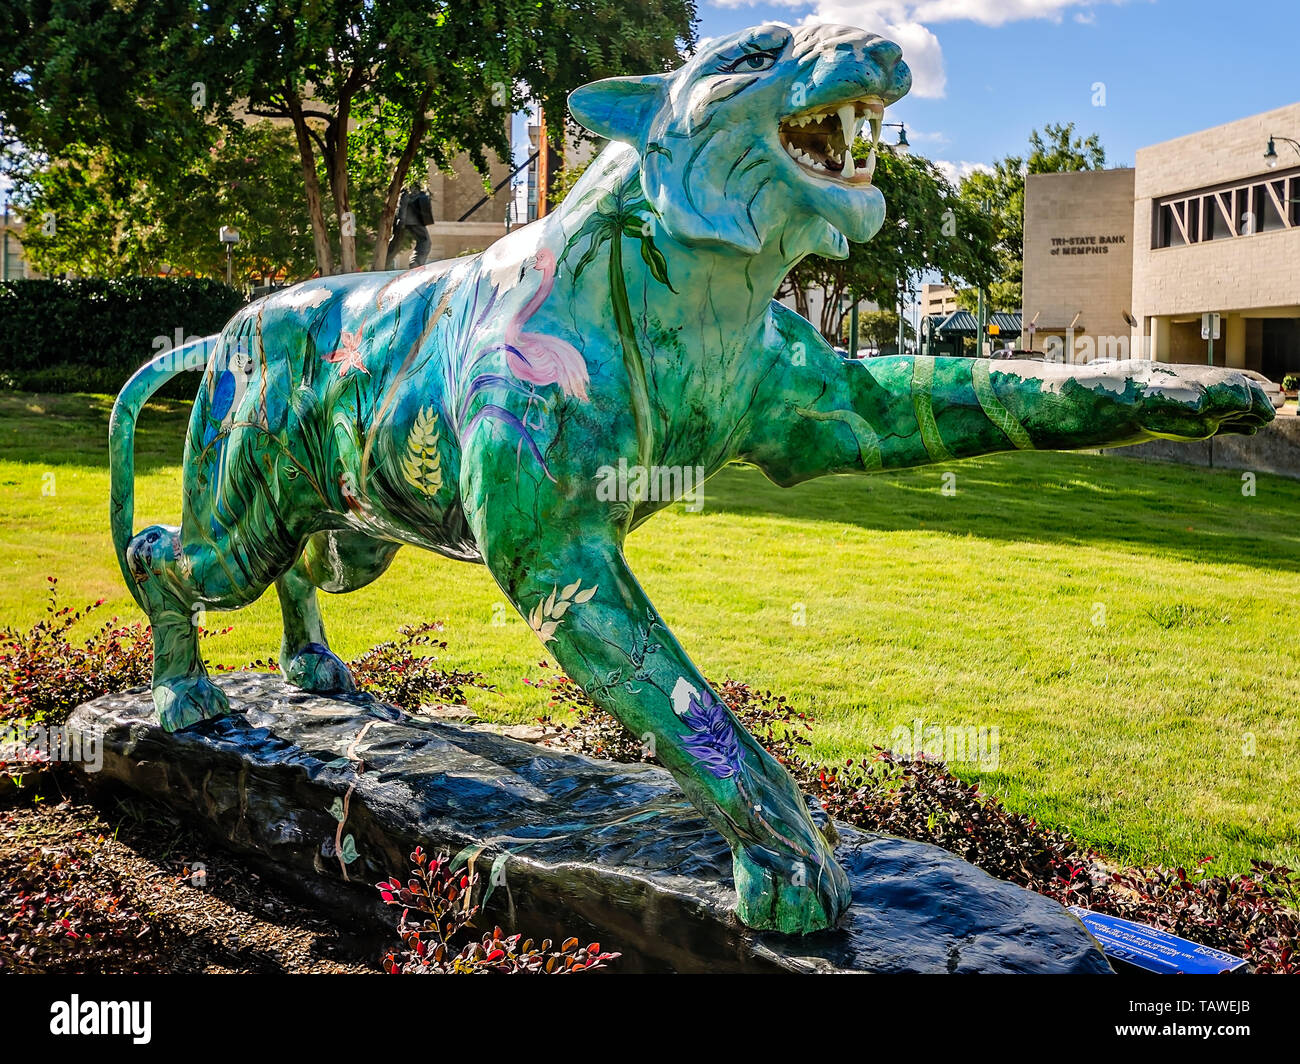 A painted tiger statue is displayed downtown, Sept. 12, 2015, in Memphis, Tennessee. The Tigers Around Town display features 100 painted tigers. Stock Photo